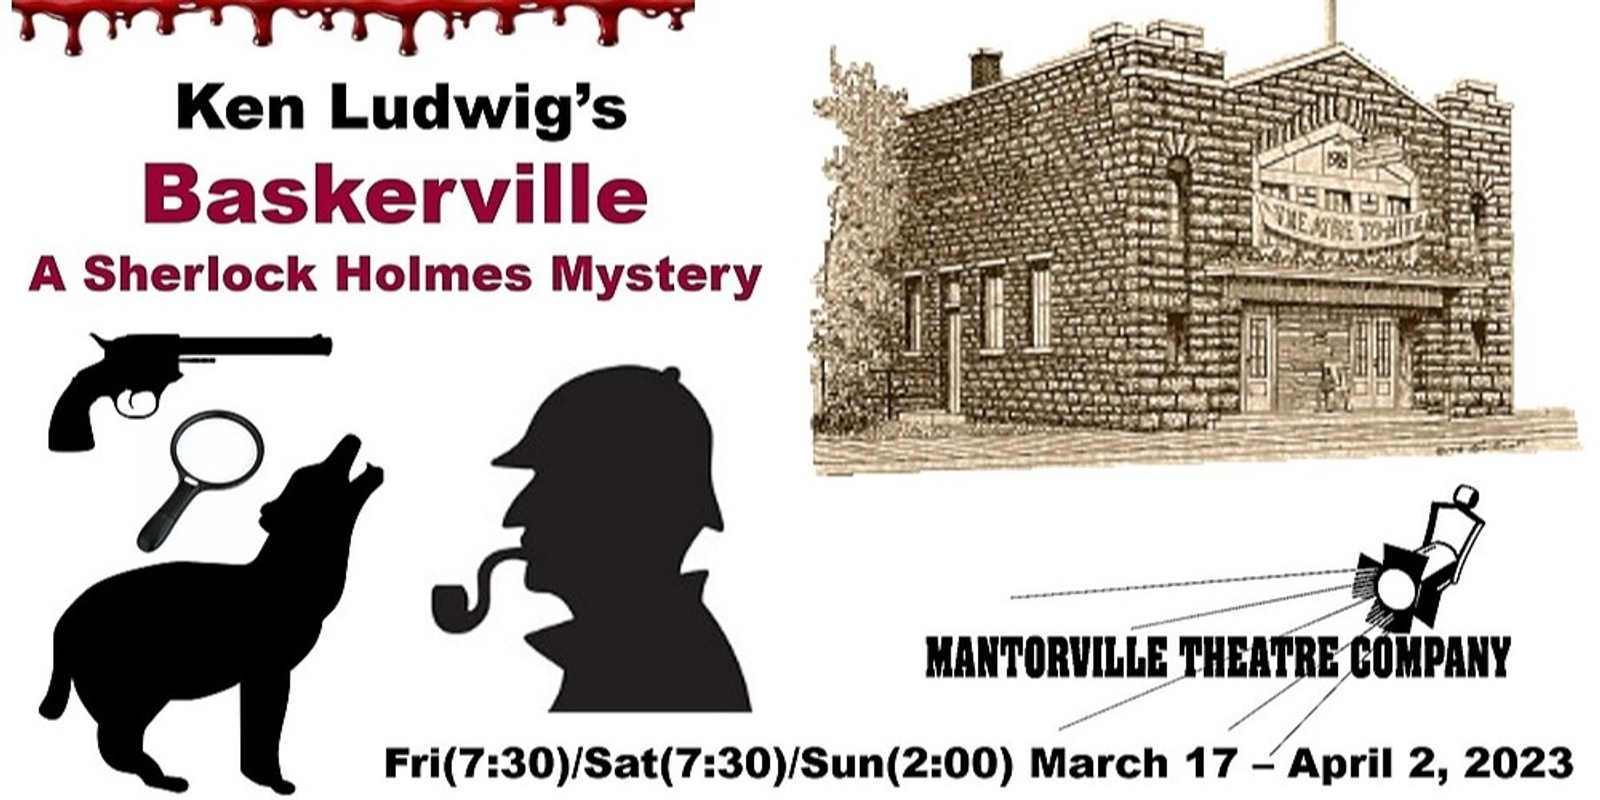 Baskerville - A Sherlock Holmes Mystery, by Ken Ludwig March 25th 7:30 p.m.